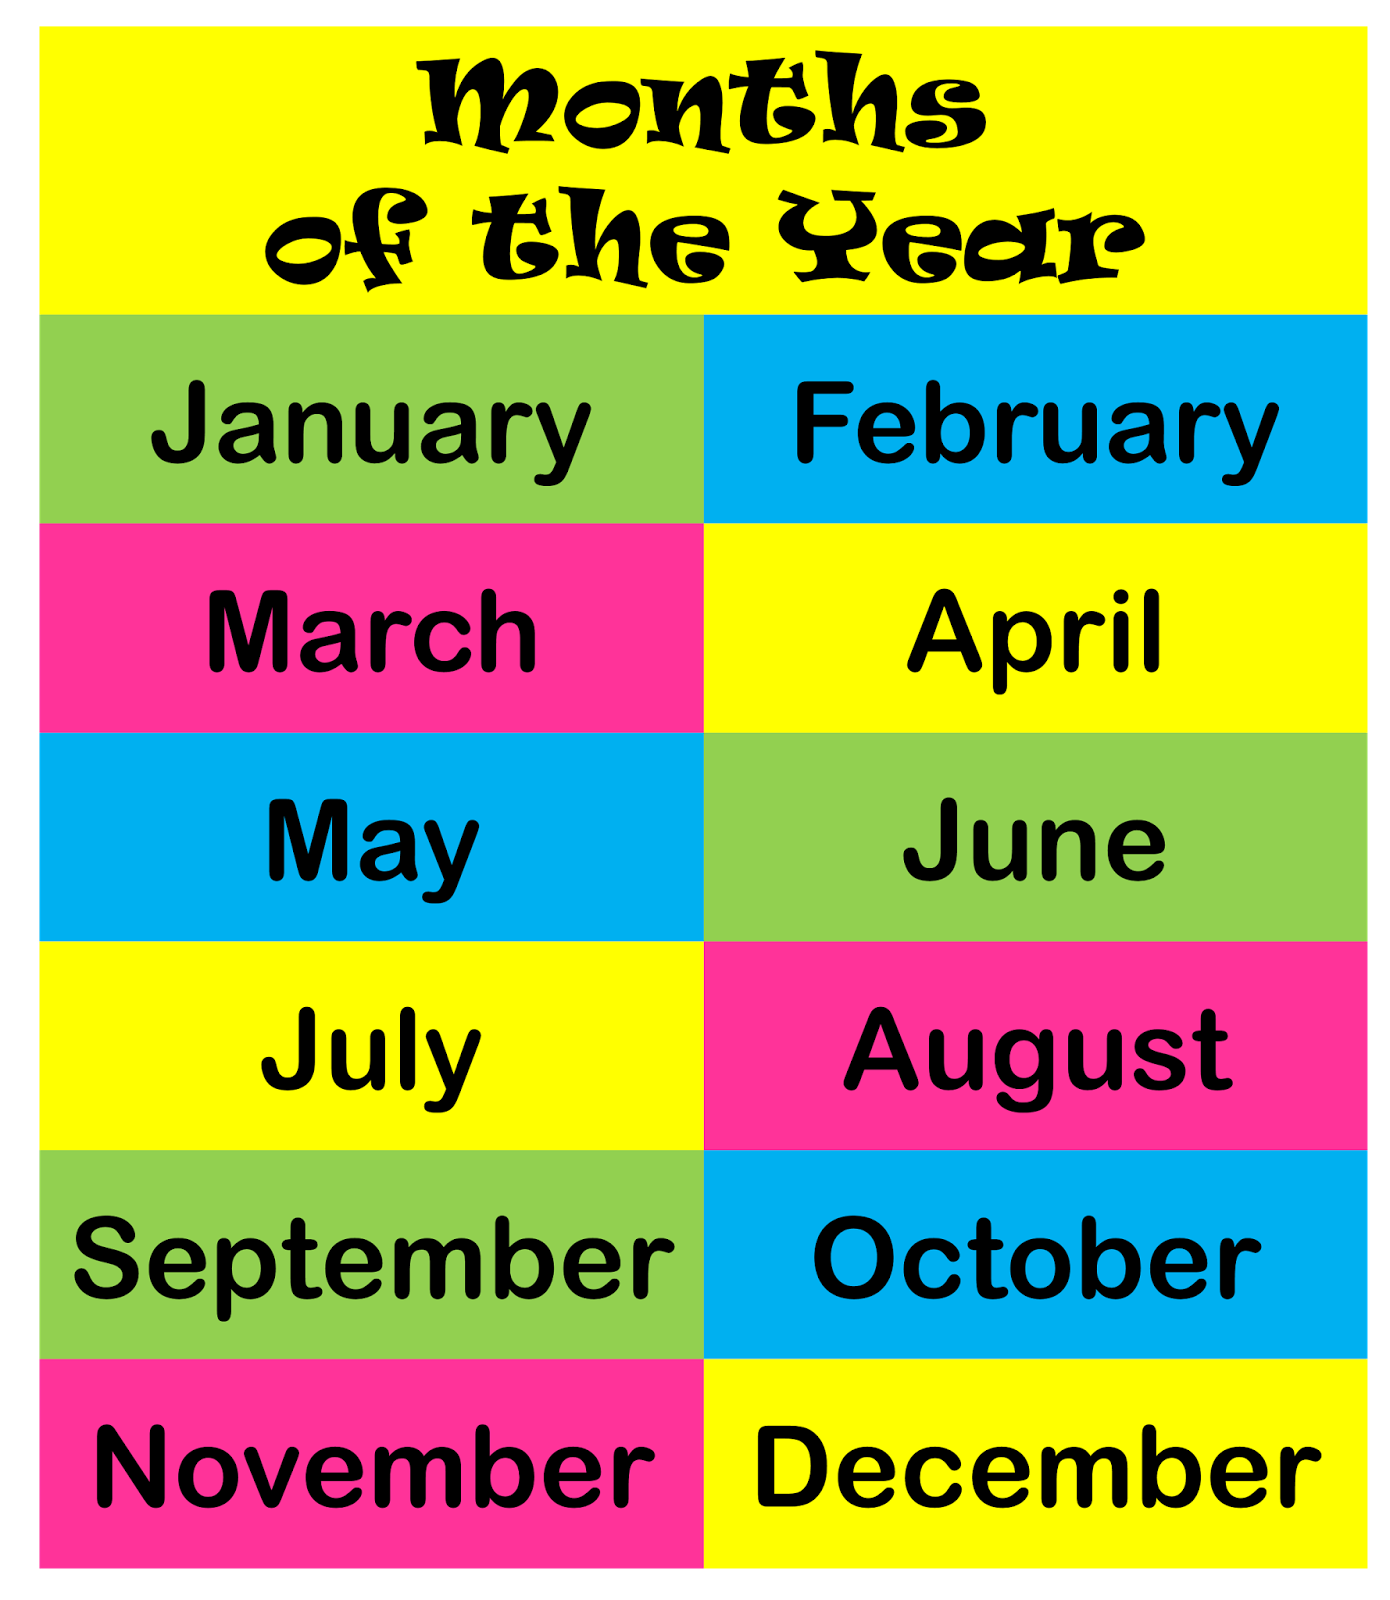 February is month of the year. Месяцы на английском для детей. Months in English. Months of the year. Картинка months.